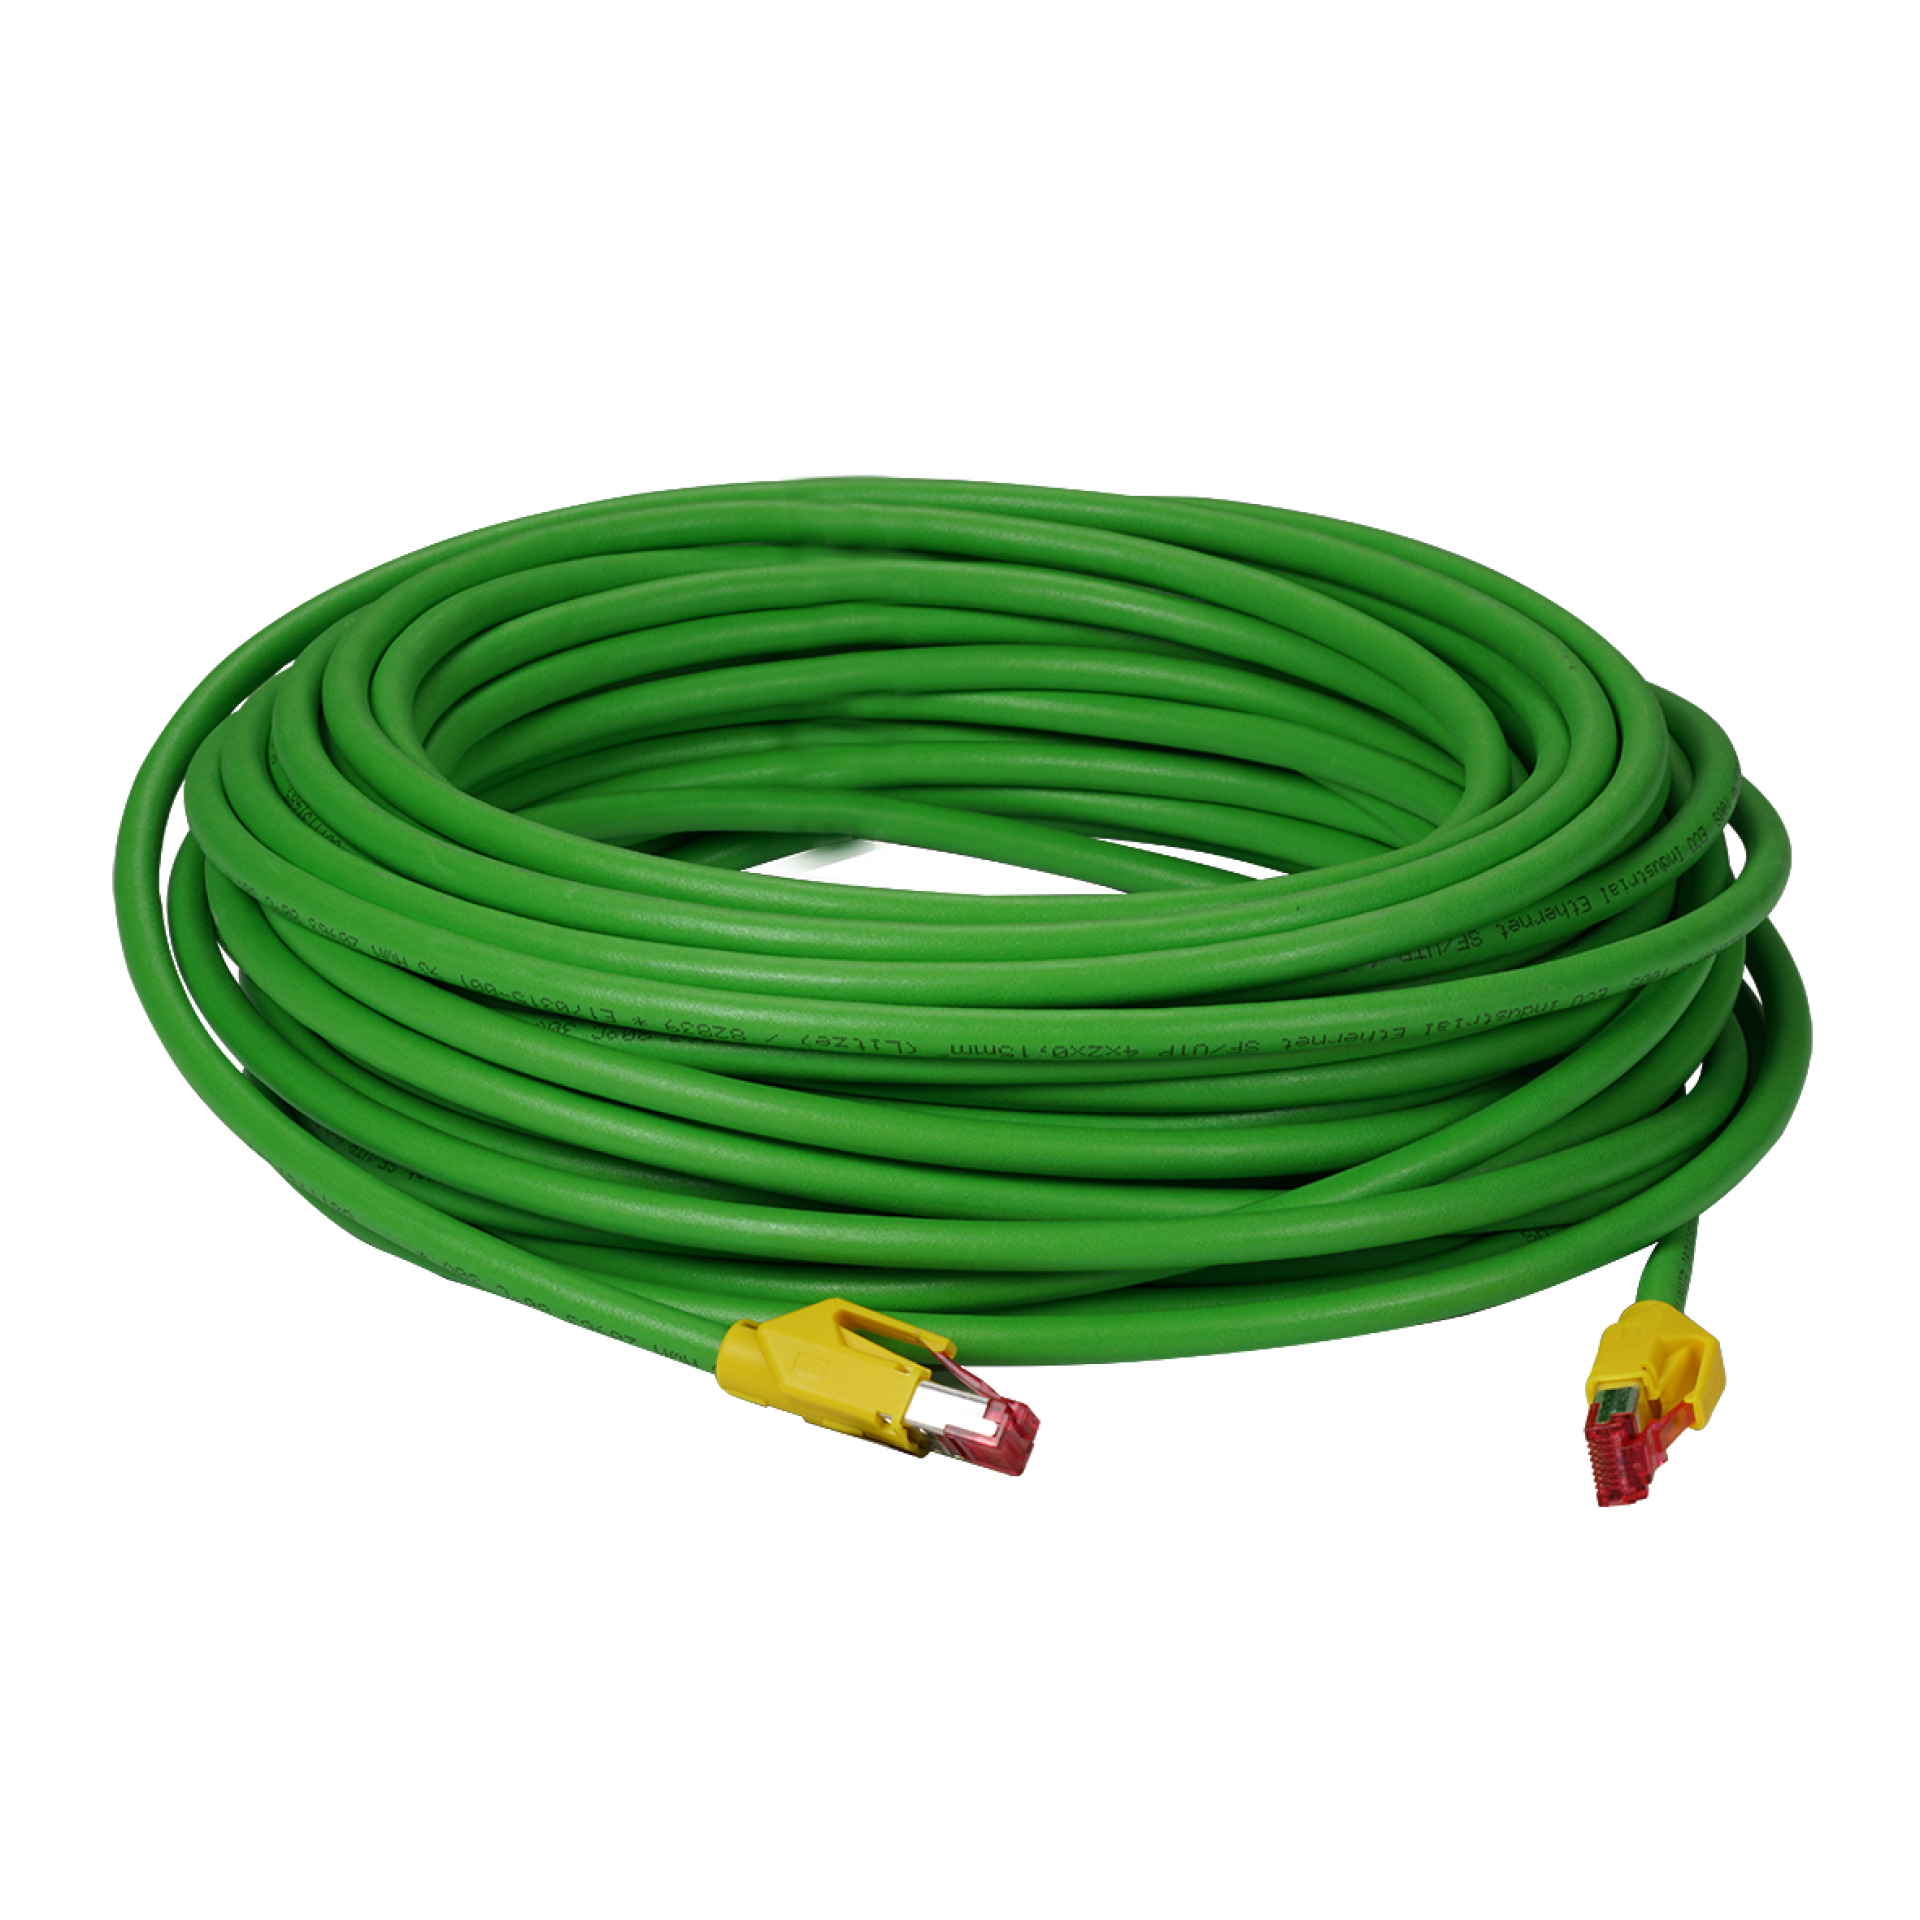 RJ45 TM21 yellow Patch cable SF/UTP green, Cat.5e, PUR ,drag chain suitable, 1m